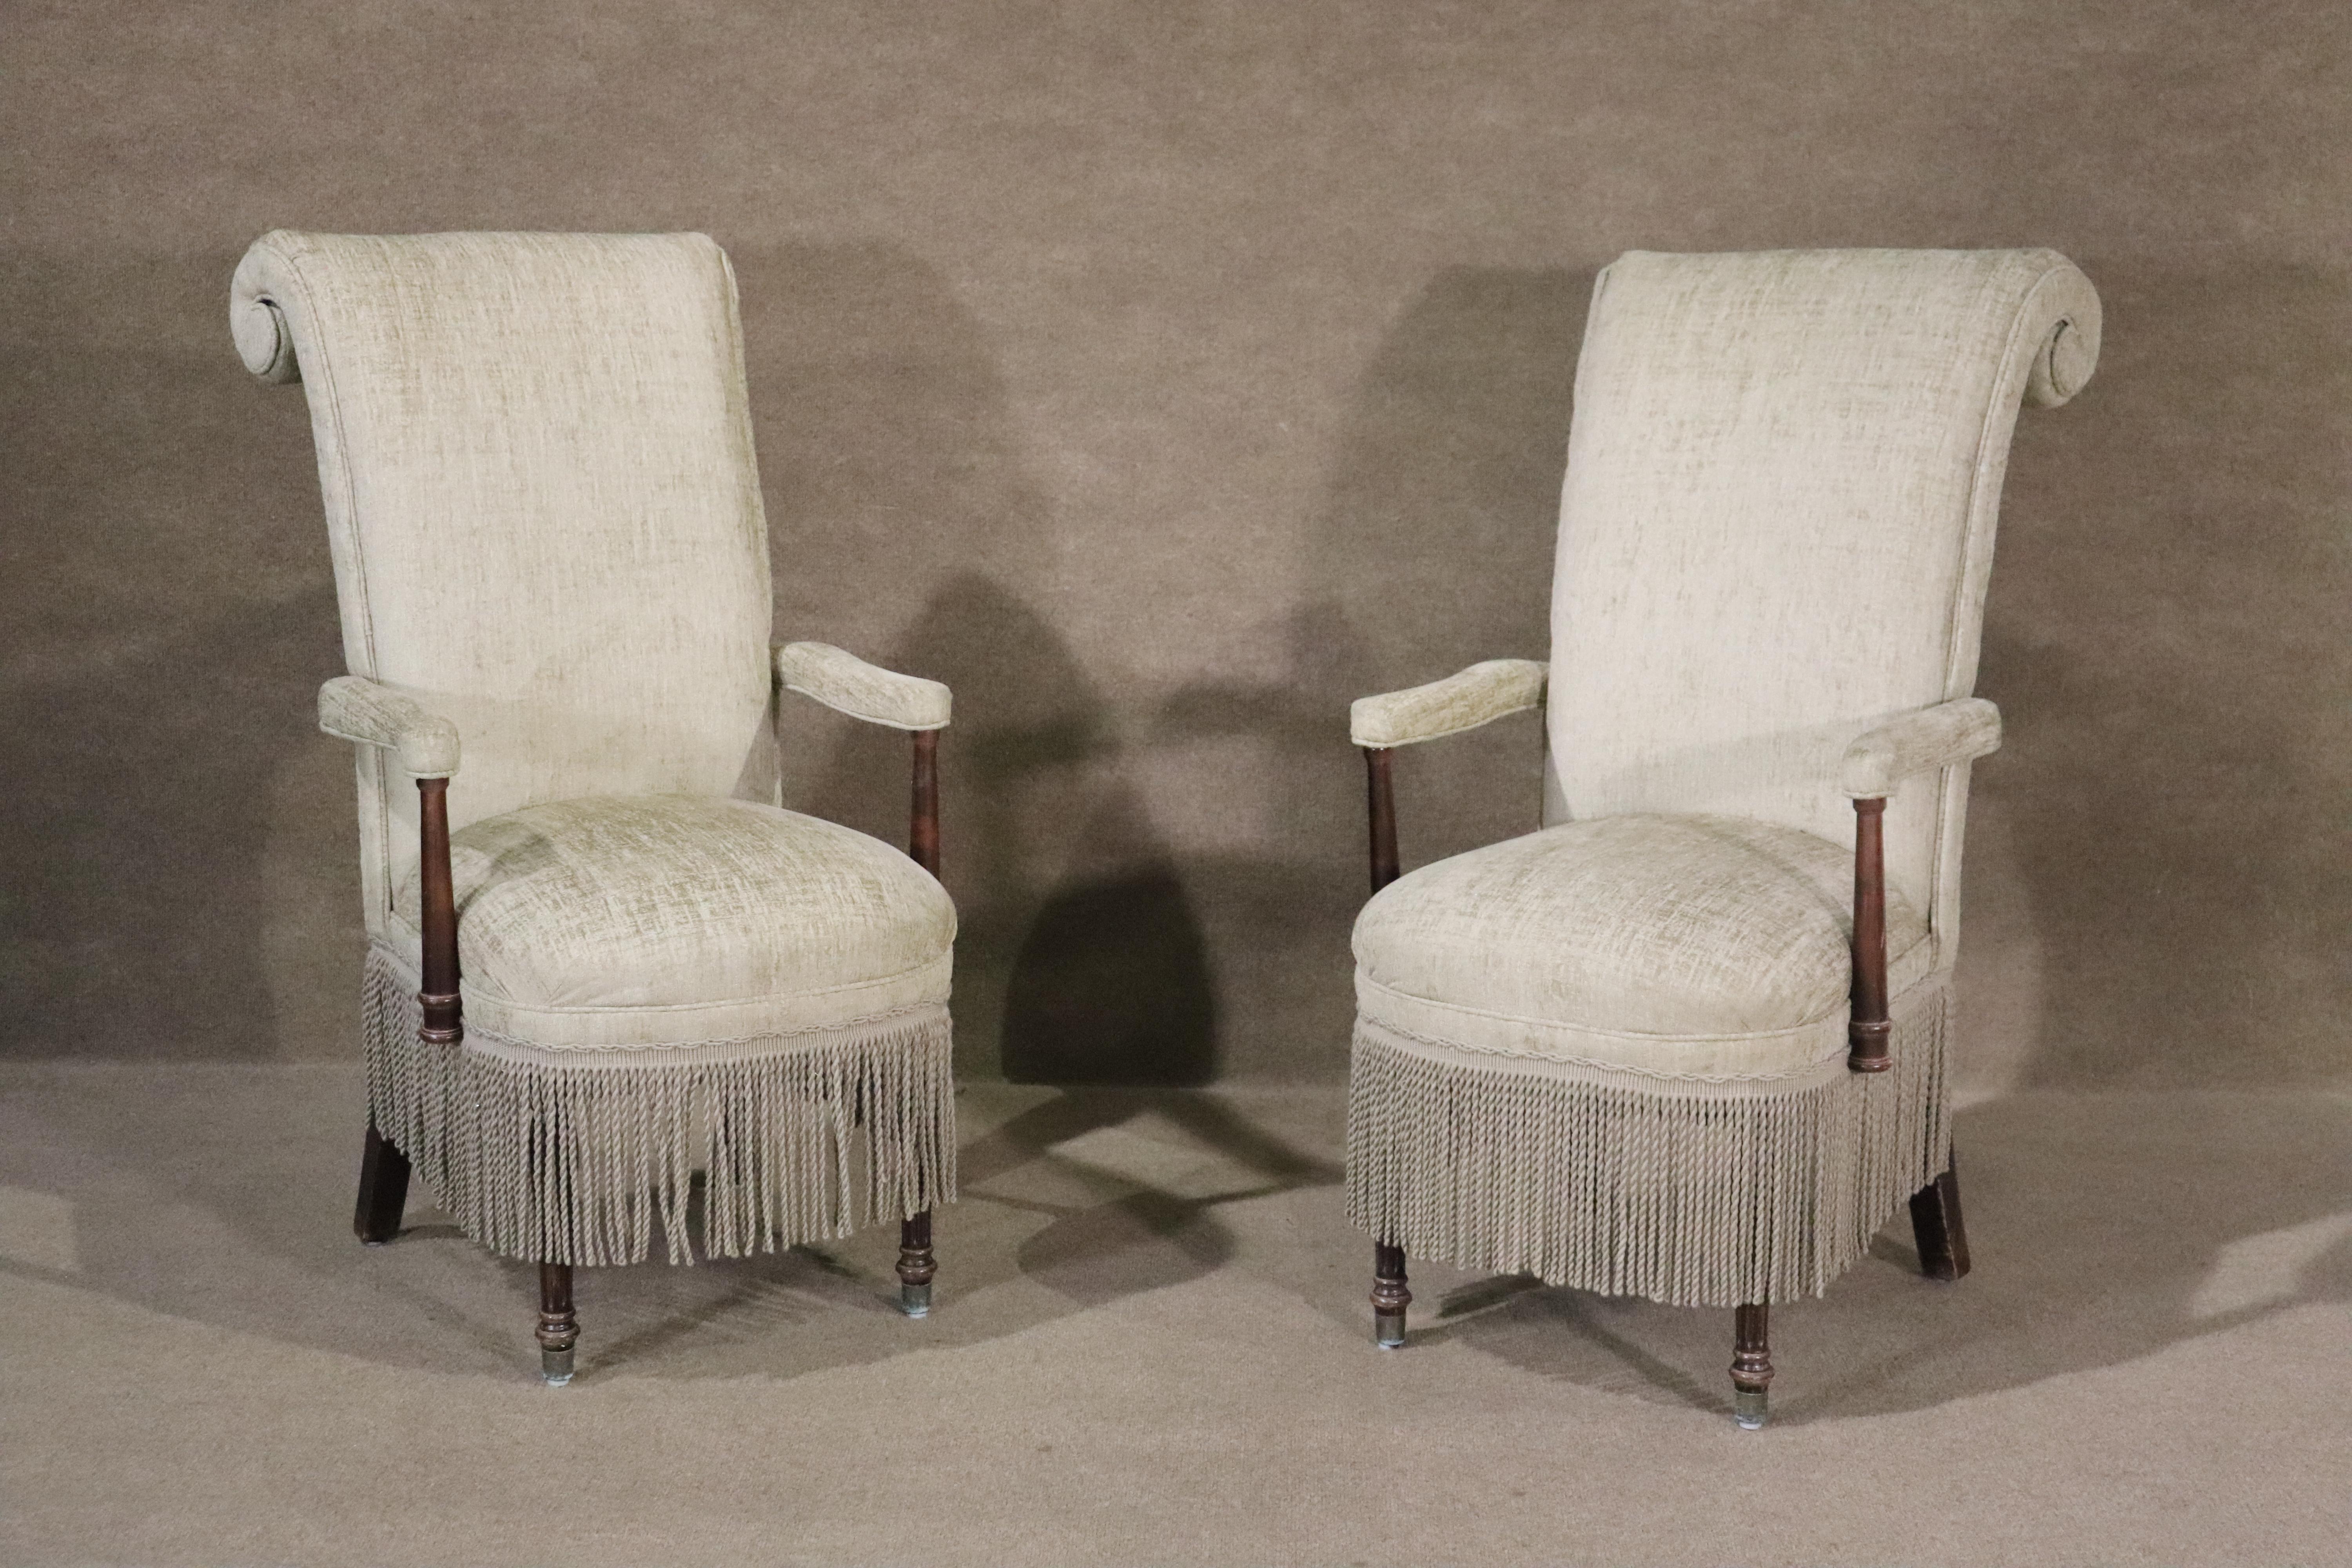 This set of upholstered mid-century armchairs are a gorgeous and tasteful addition to any home. Long tassels hang between the legs to add a natural touch to a distinct scroll-back design.

Please confirm location (NY or NJ)